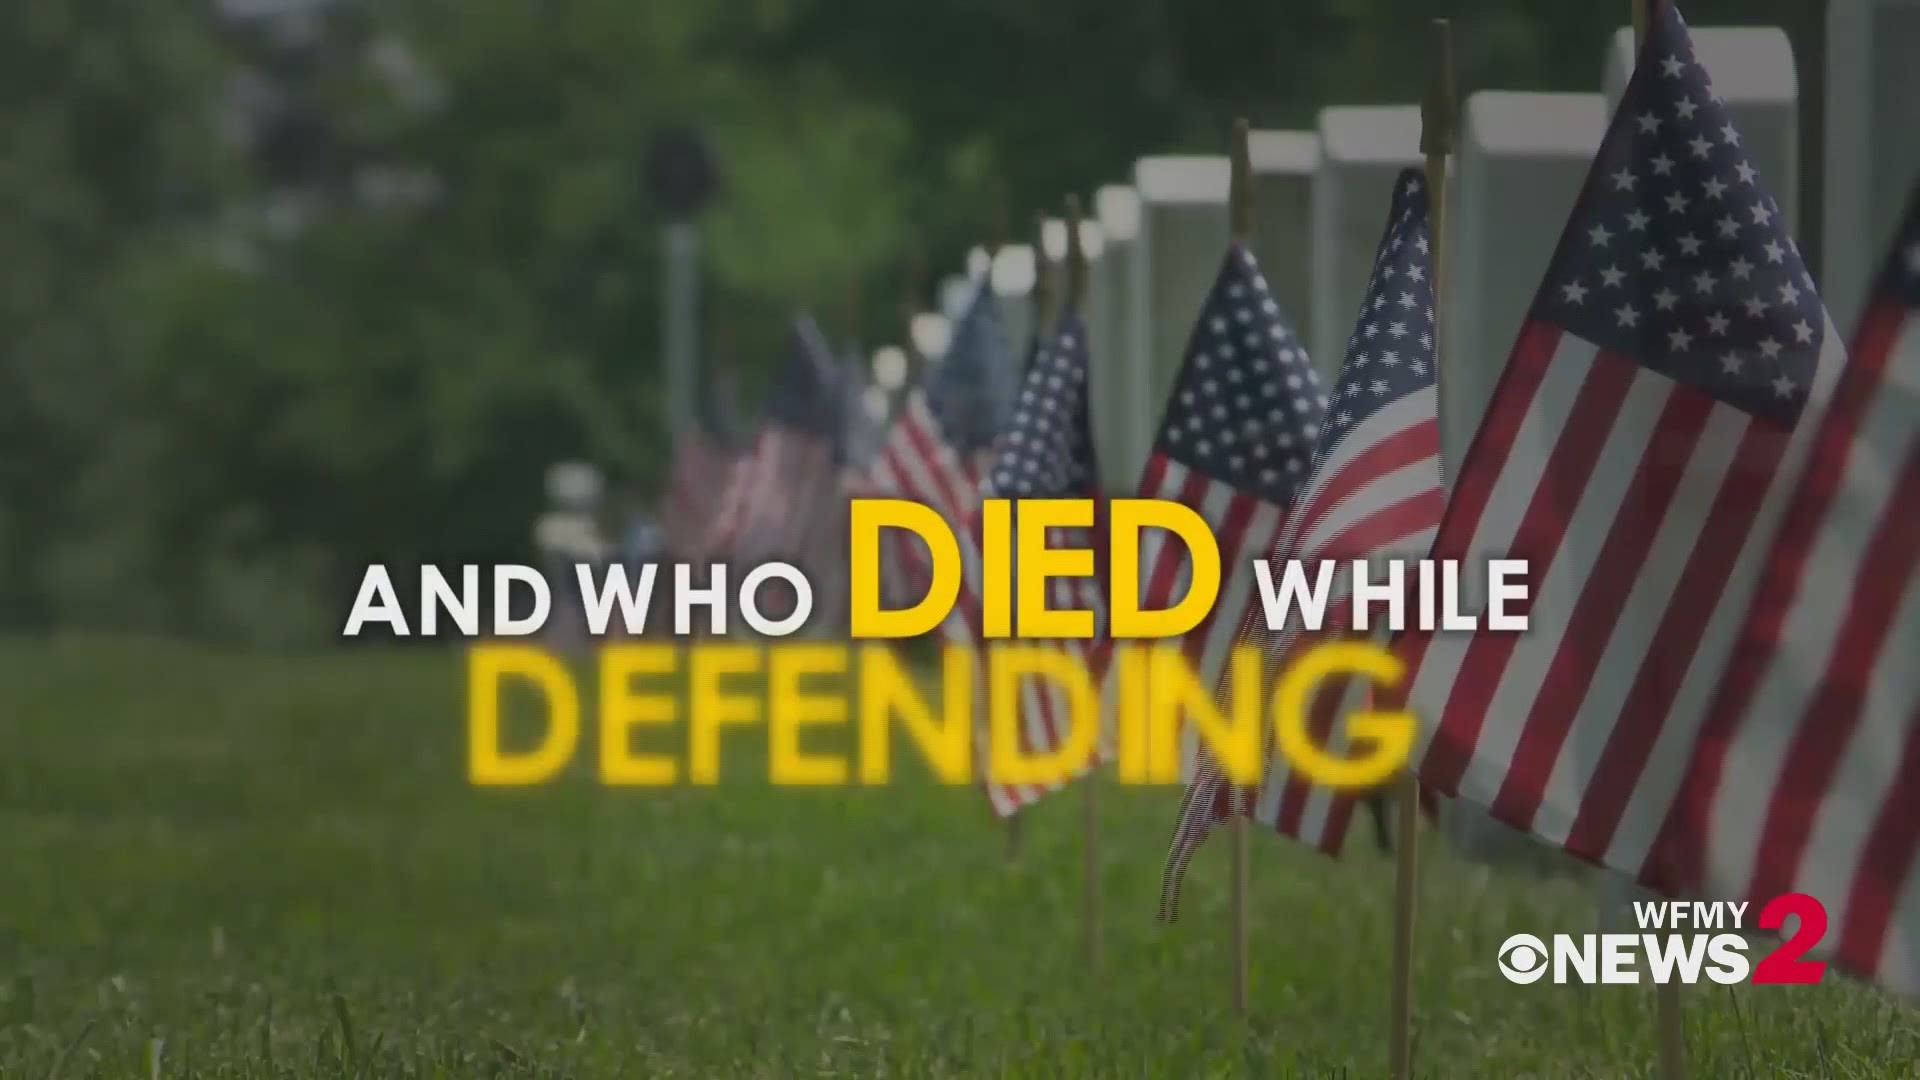 Memorial Day isn't just an opportunity for a barbecue or beach trip. It's a day honoring American soldiers, marines who made the ultimate sacrifice for their country.